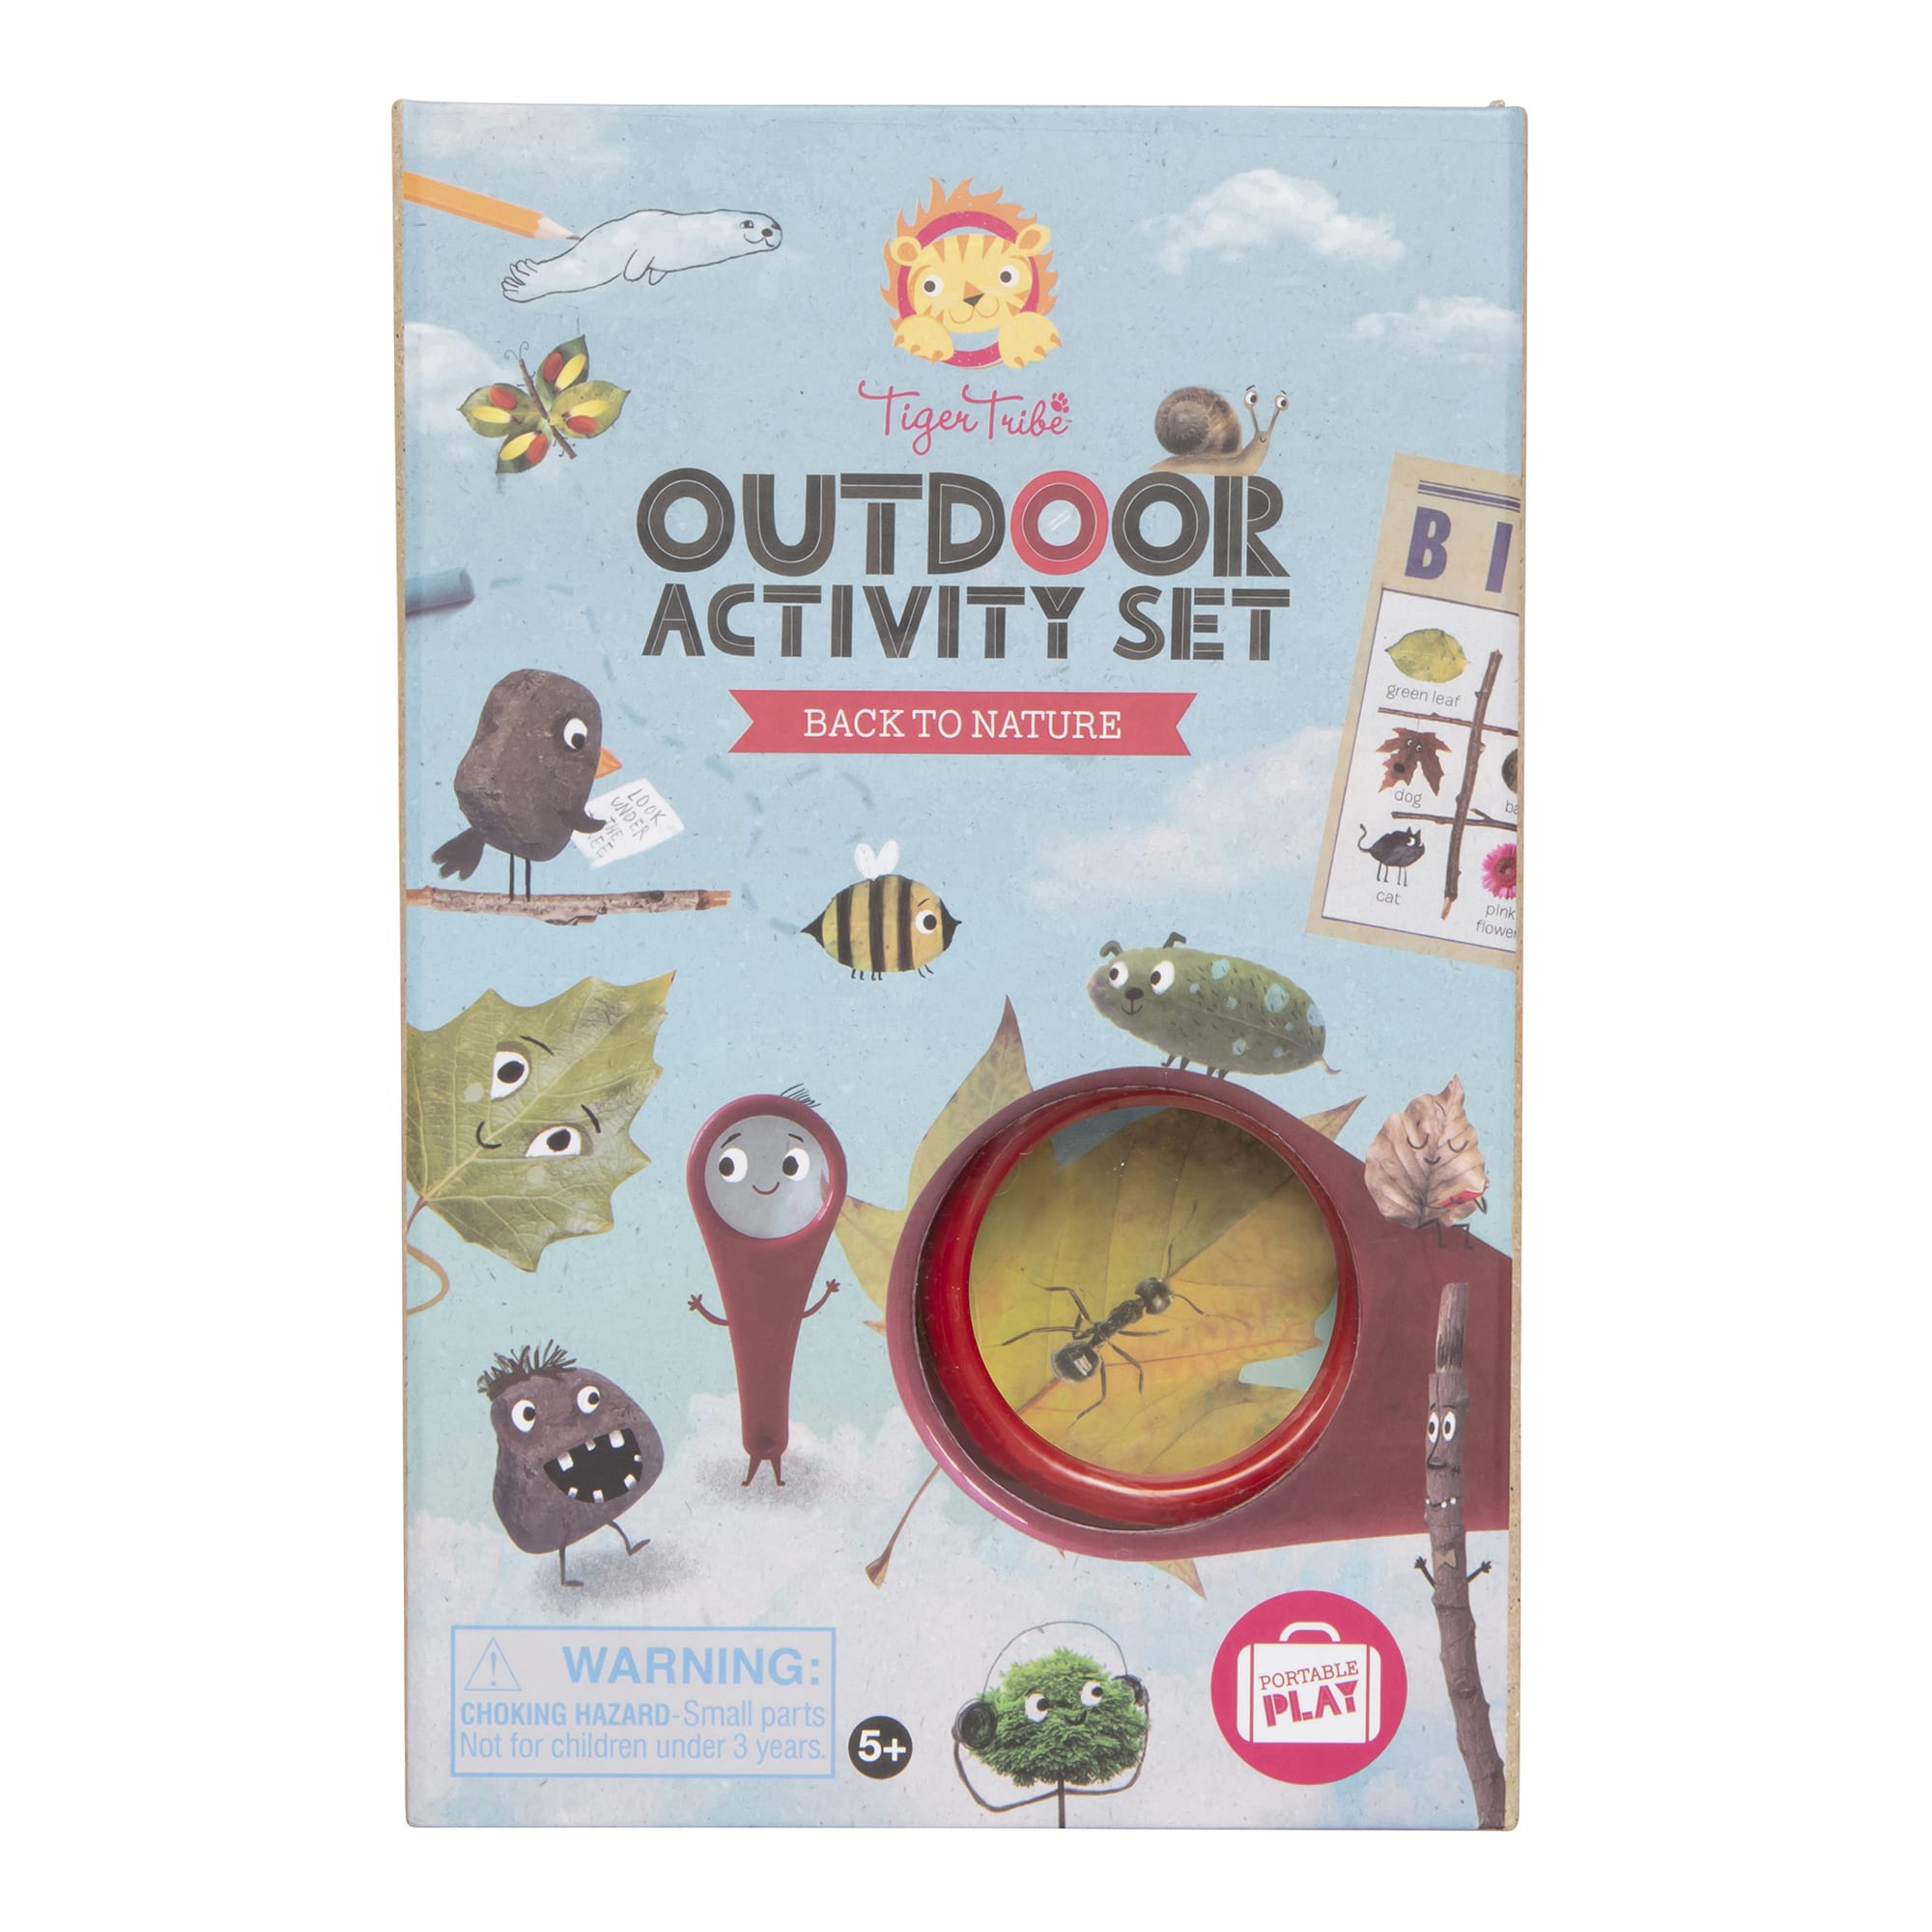 Outdoor Activiry Set - Back To Nature    